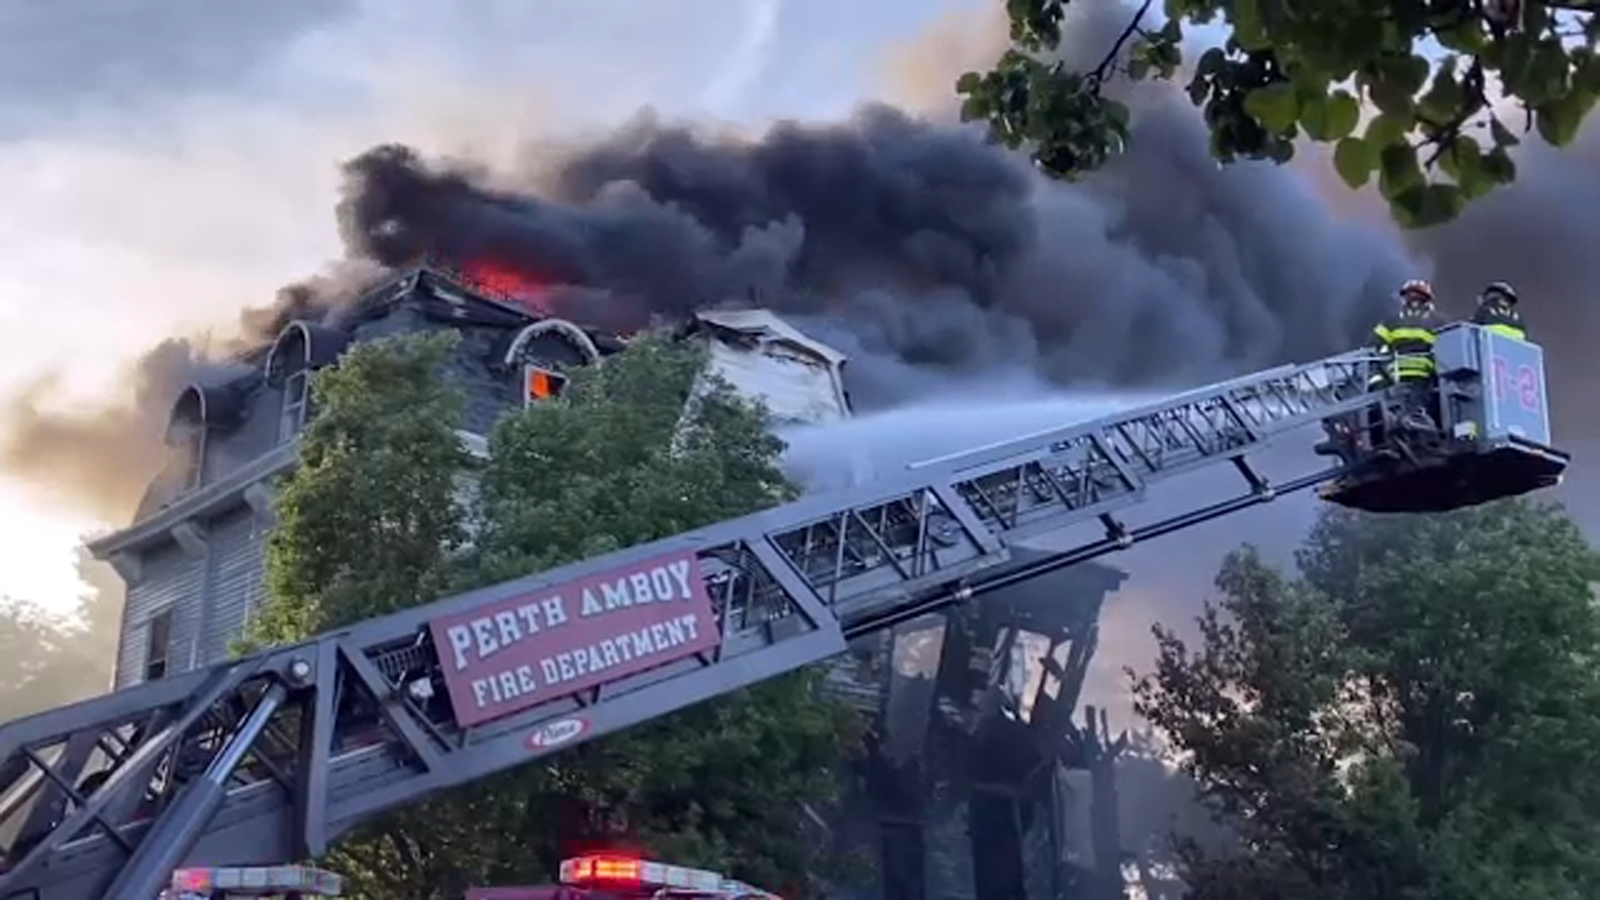 Perth Amboy house fire: 2 officers injured while helping people escape from burning home in NJ [Video]